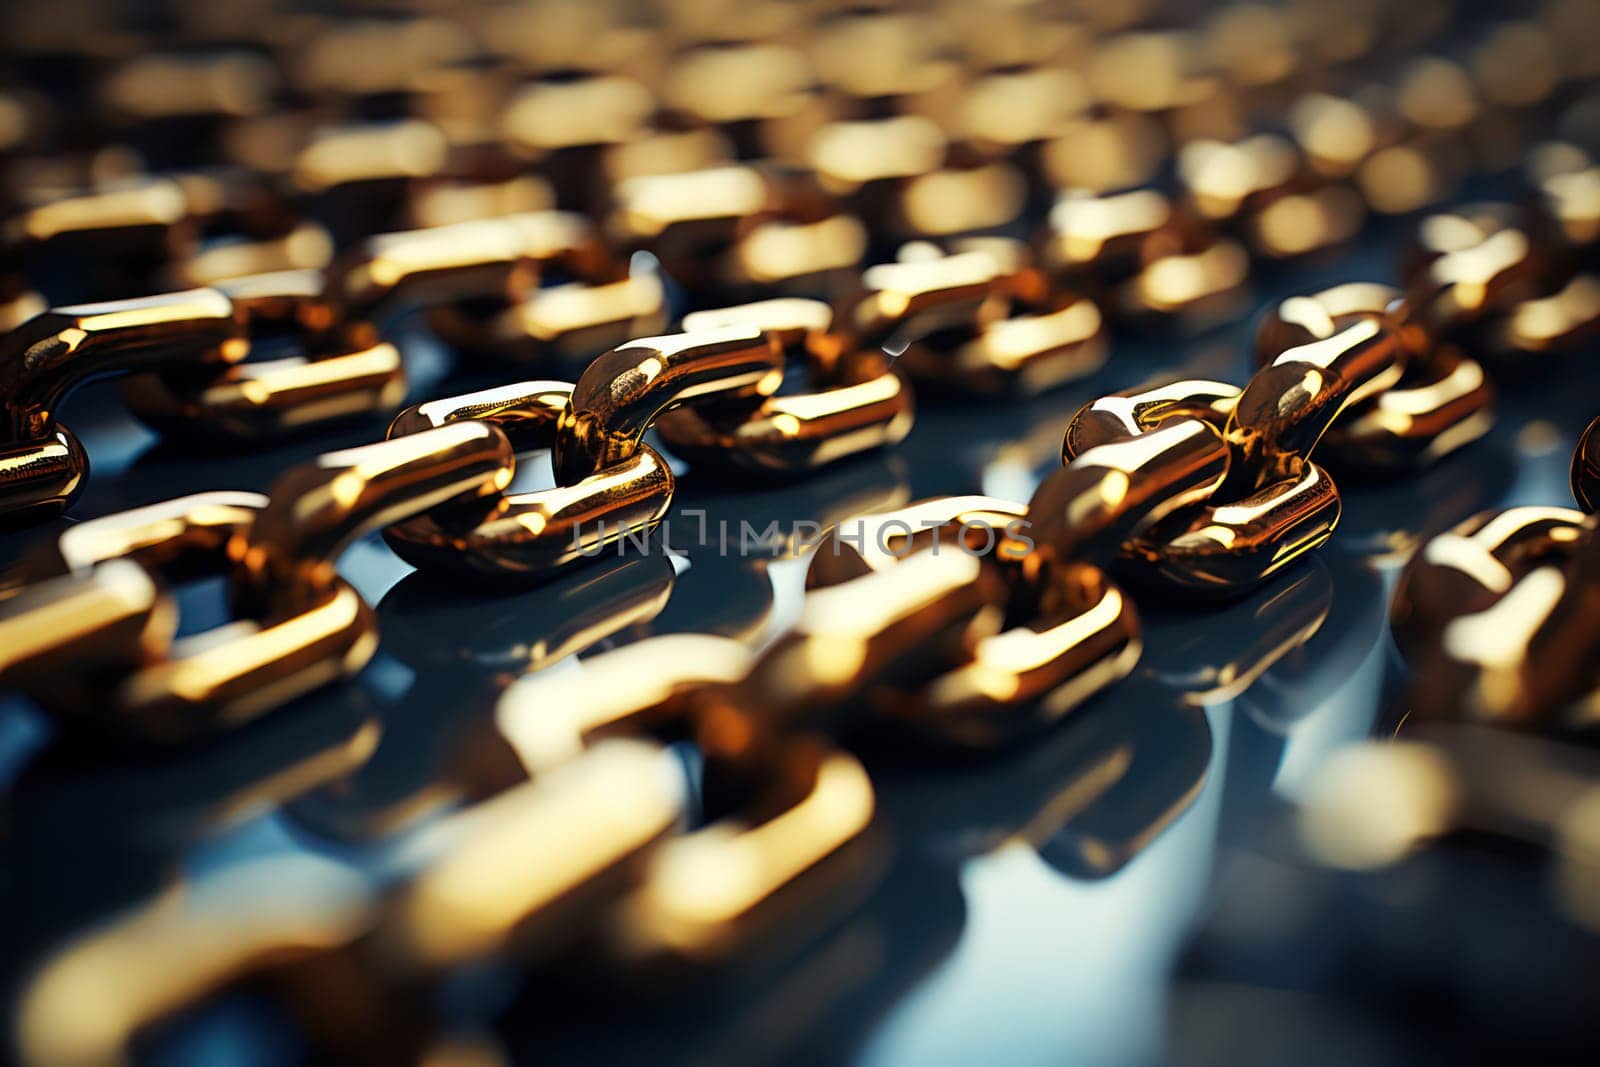 The Strong Link of Security: Shiny Steel Chains Connecting Power and Strength in Industrial Background